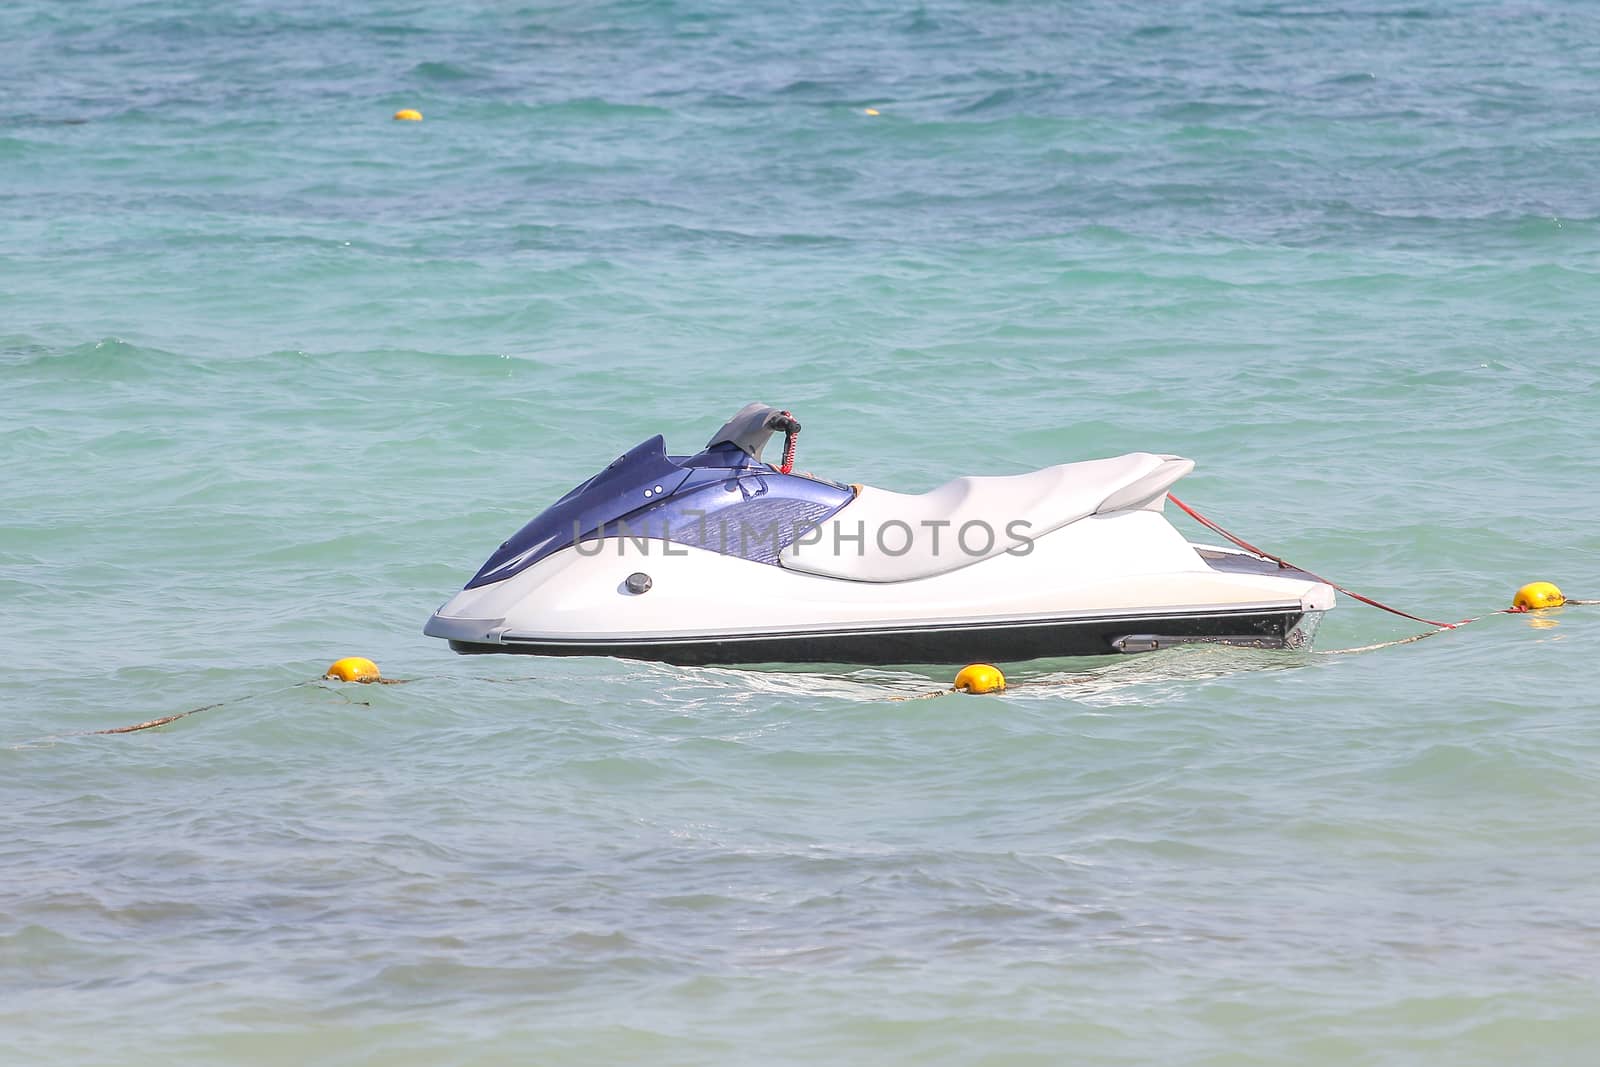 The jet ski stop on sea at thailand by pumppump